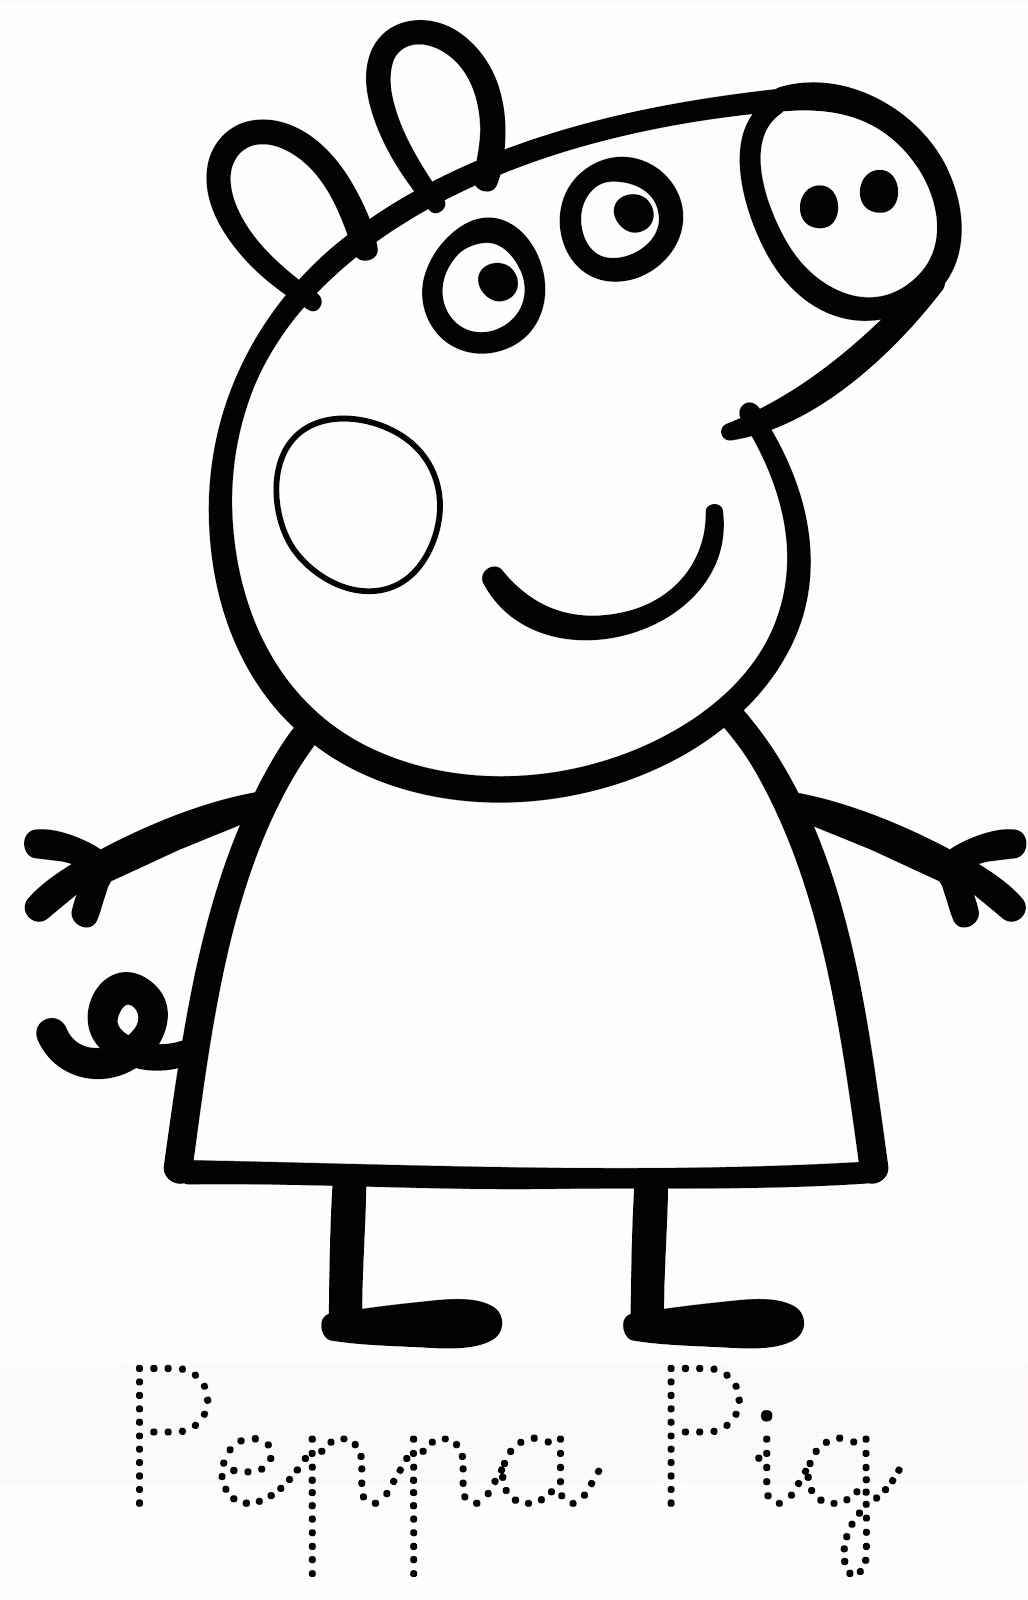 Character Peppa Pig Coloring Pages - Coloring Pages For All Ages